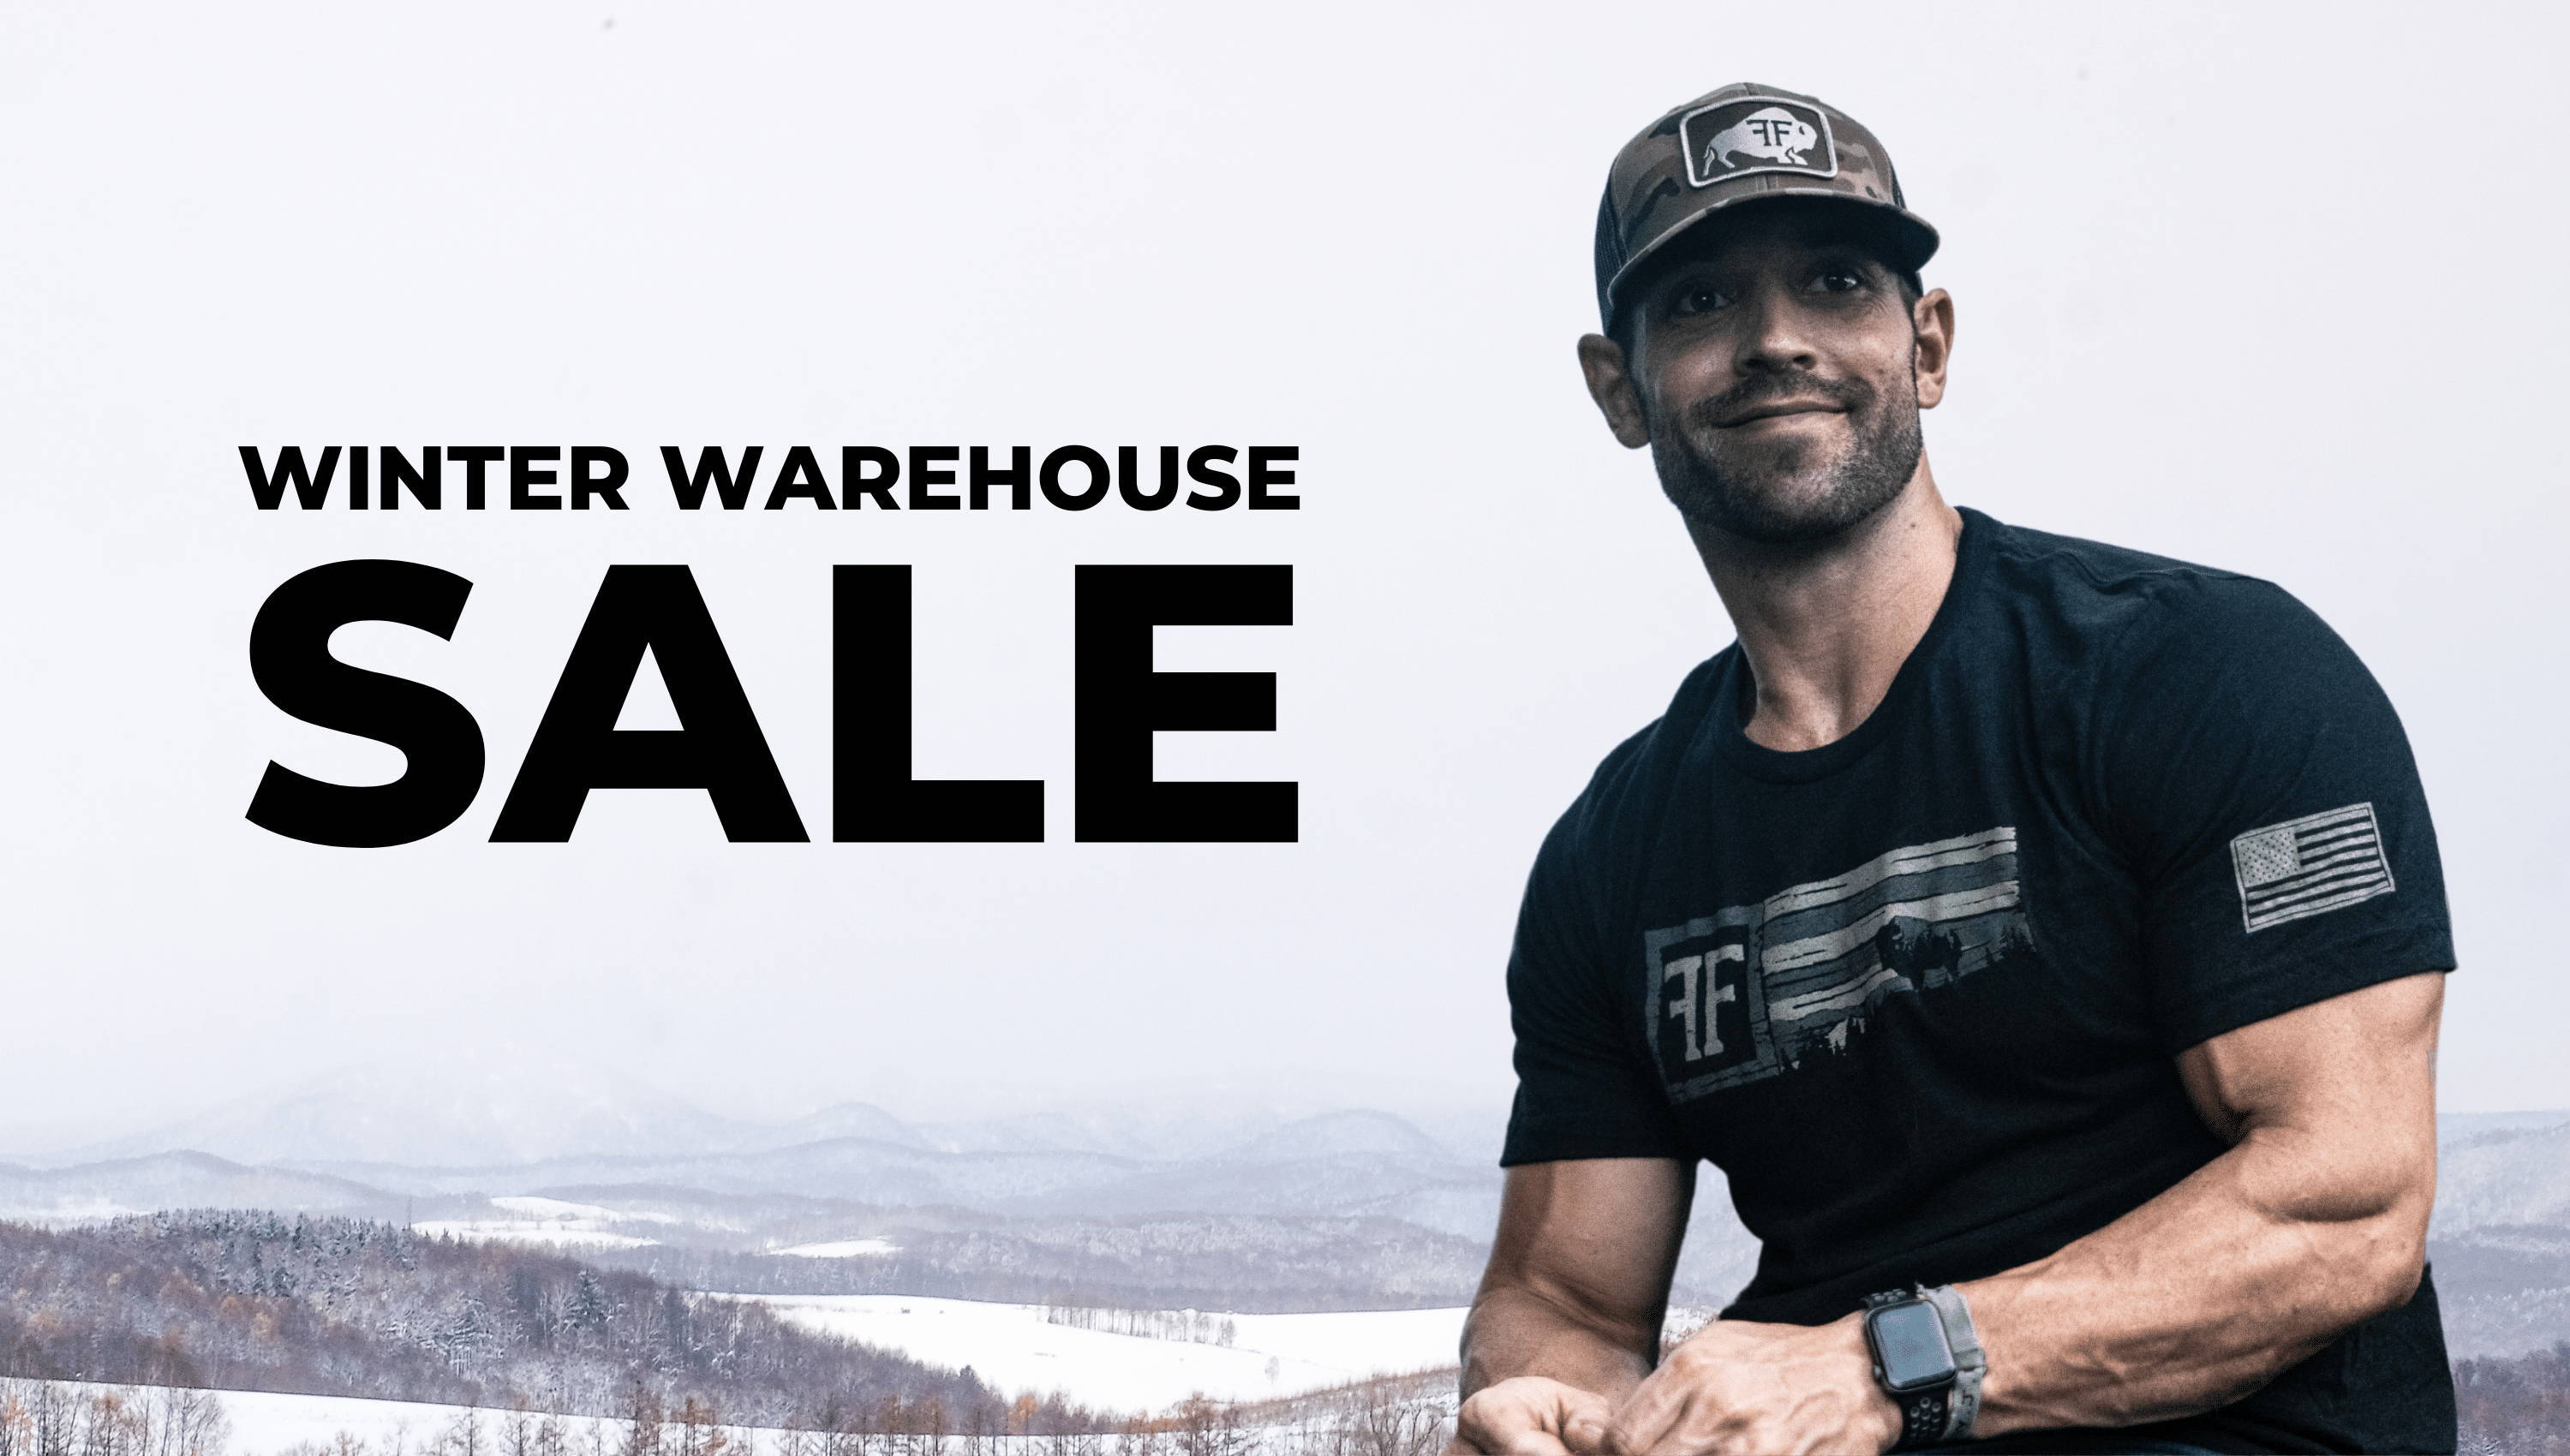 Rich froning looking into the distance for the warehouse sale